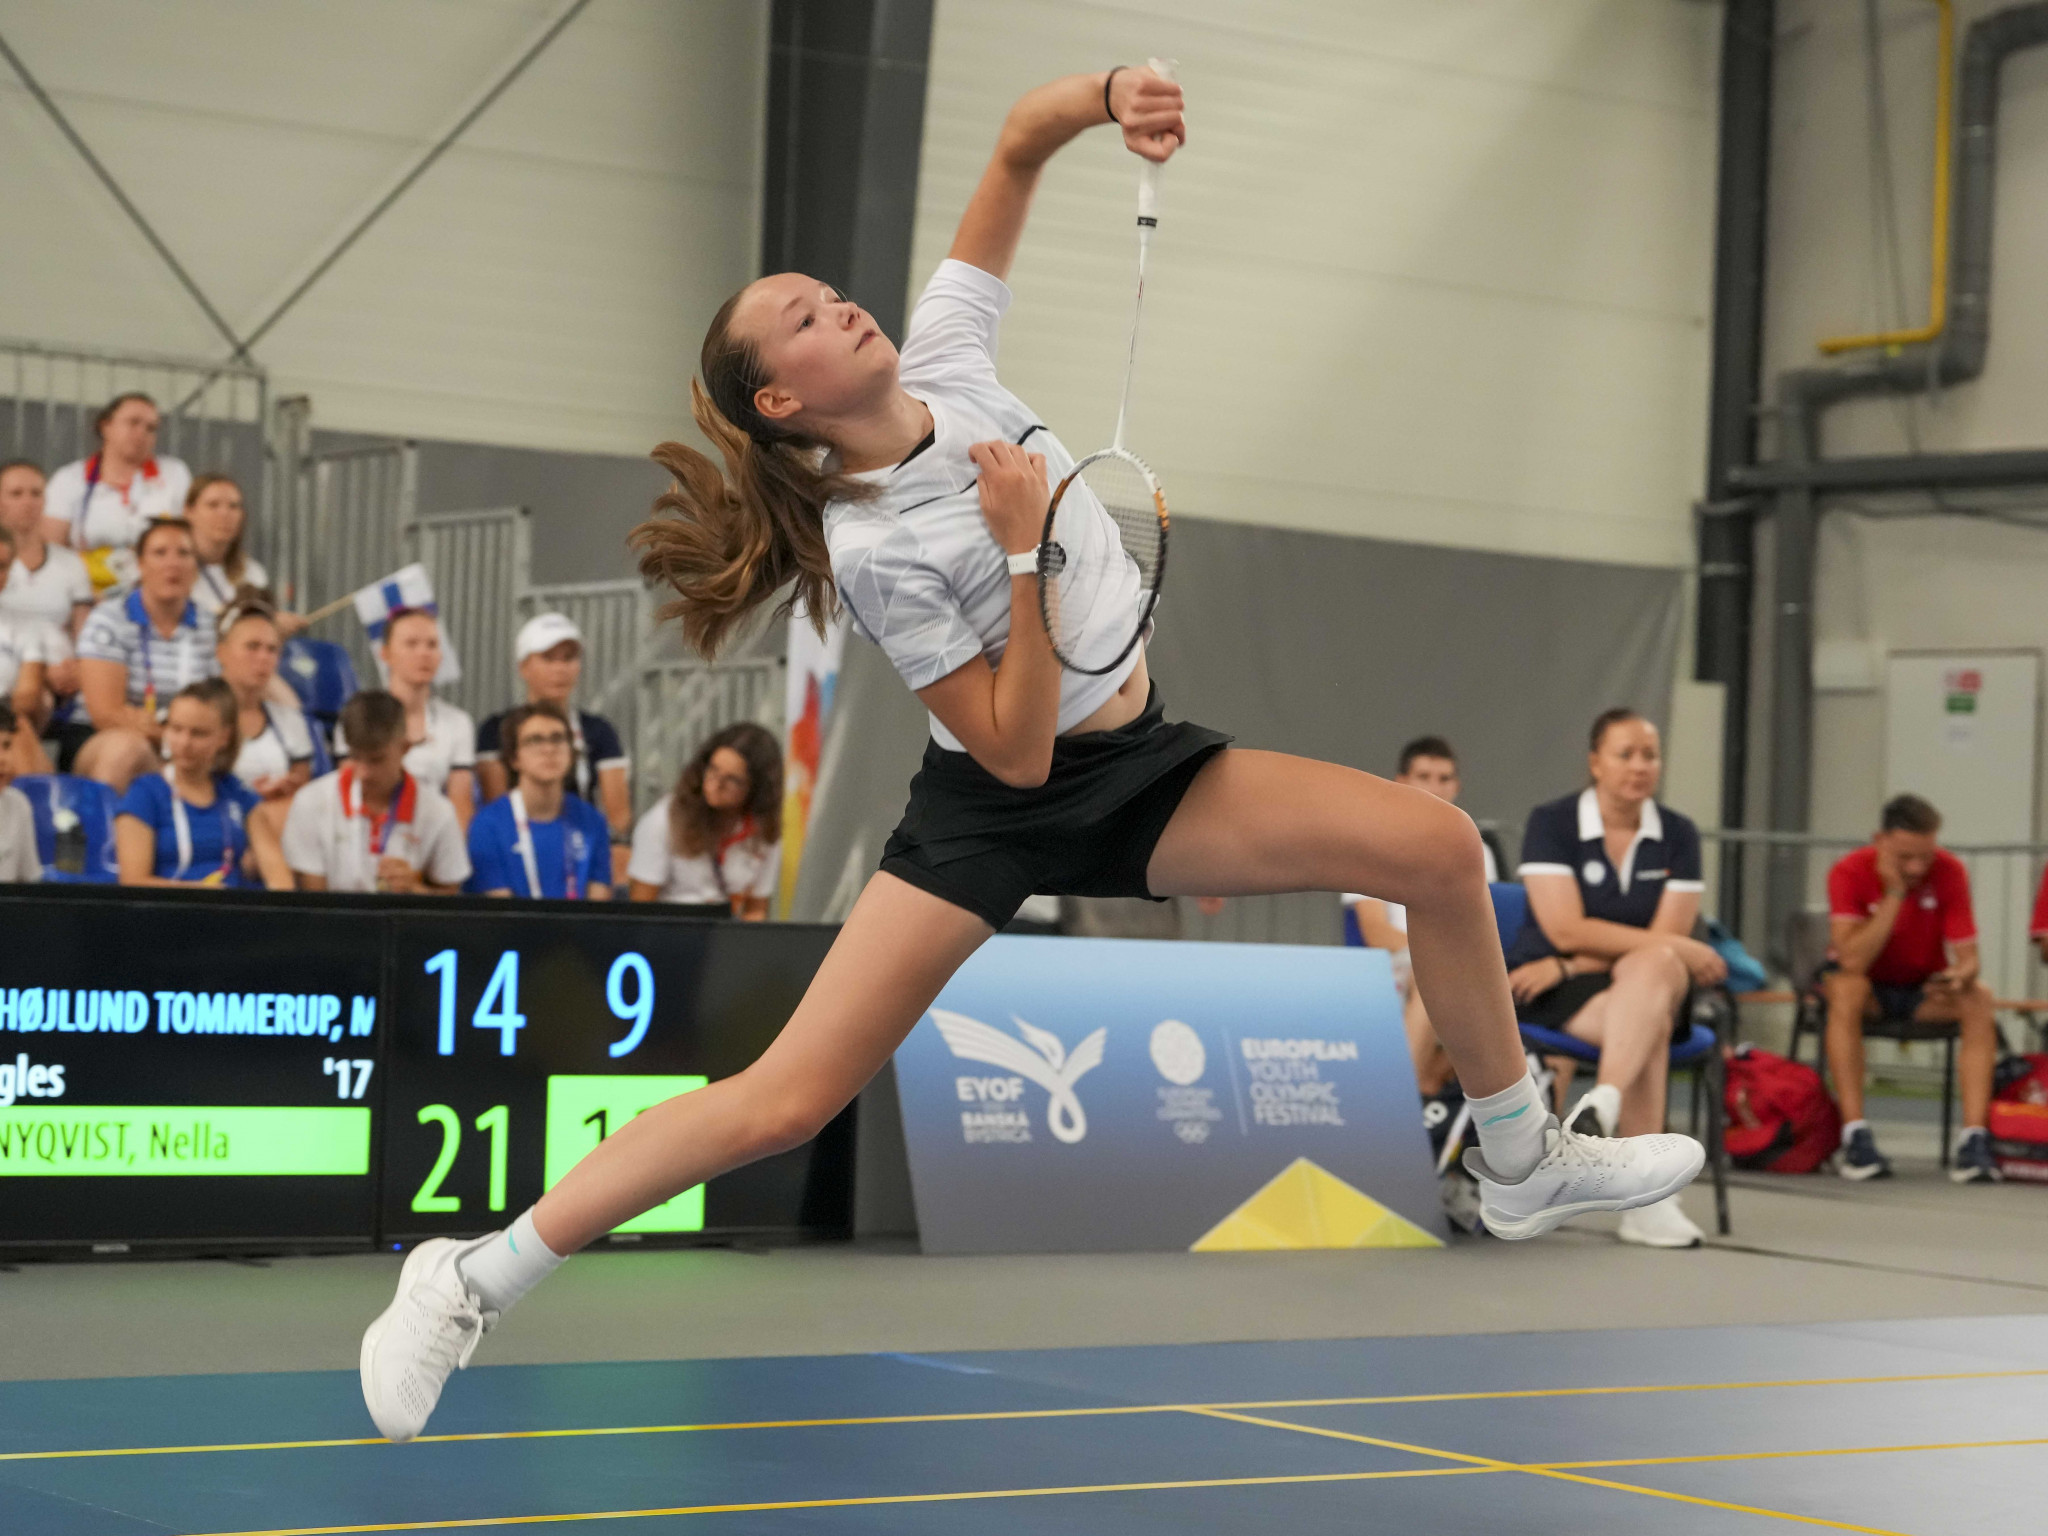 Nella Nyqvist of Finland advanced to the girls' badminton singles final with a comprehensive 21-14, 21-11 victory over Maria Tommerup of Denmark ©EYOF Banská Bystrica 2022